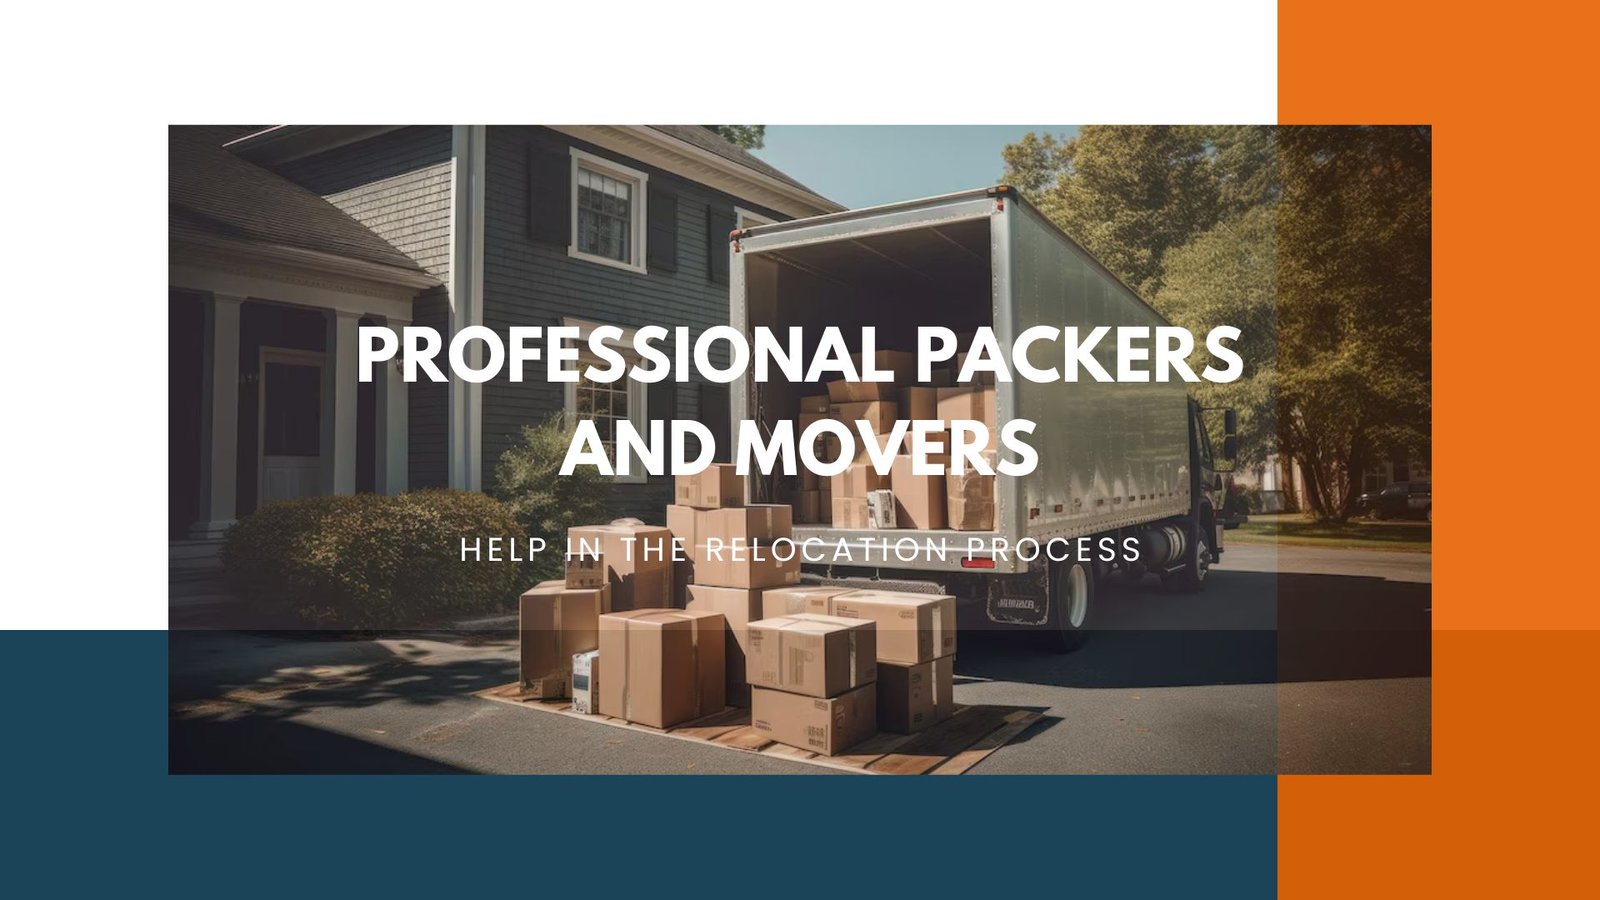 How Can Professional Packers and Movers Help in the Relocation Process?